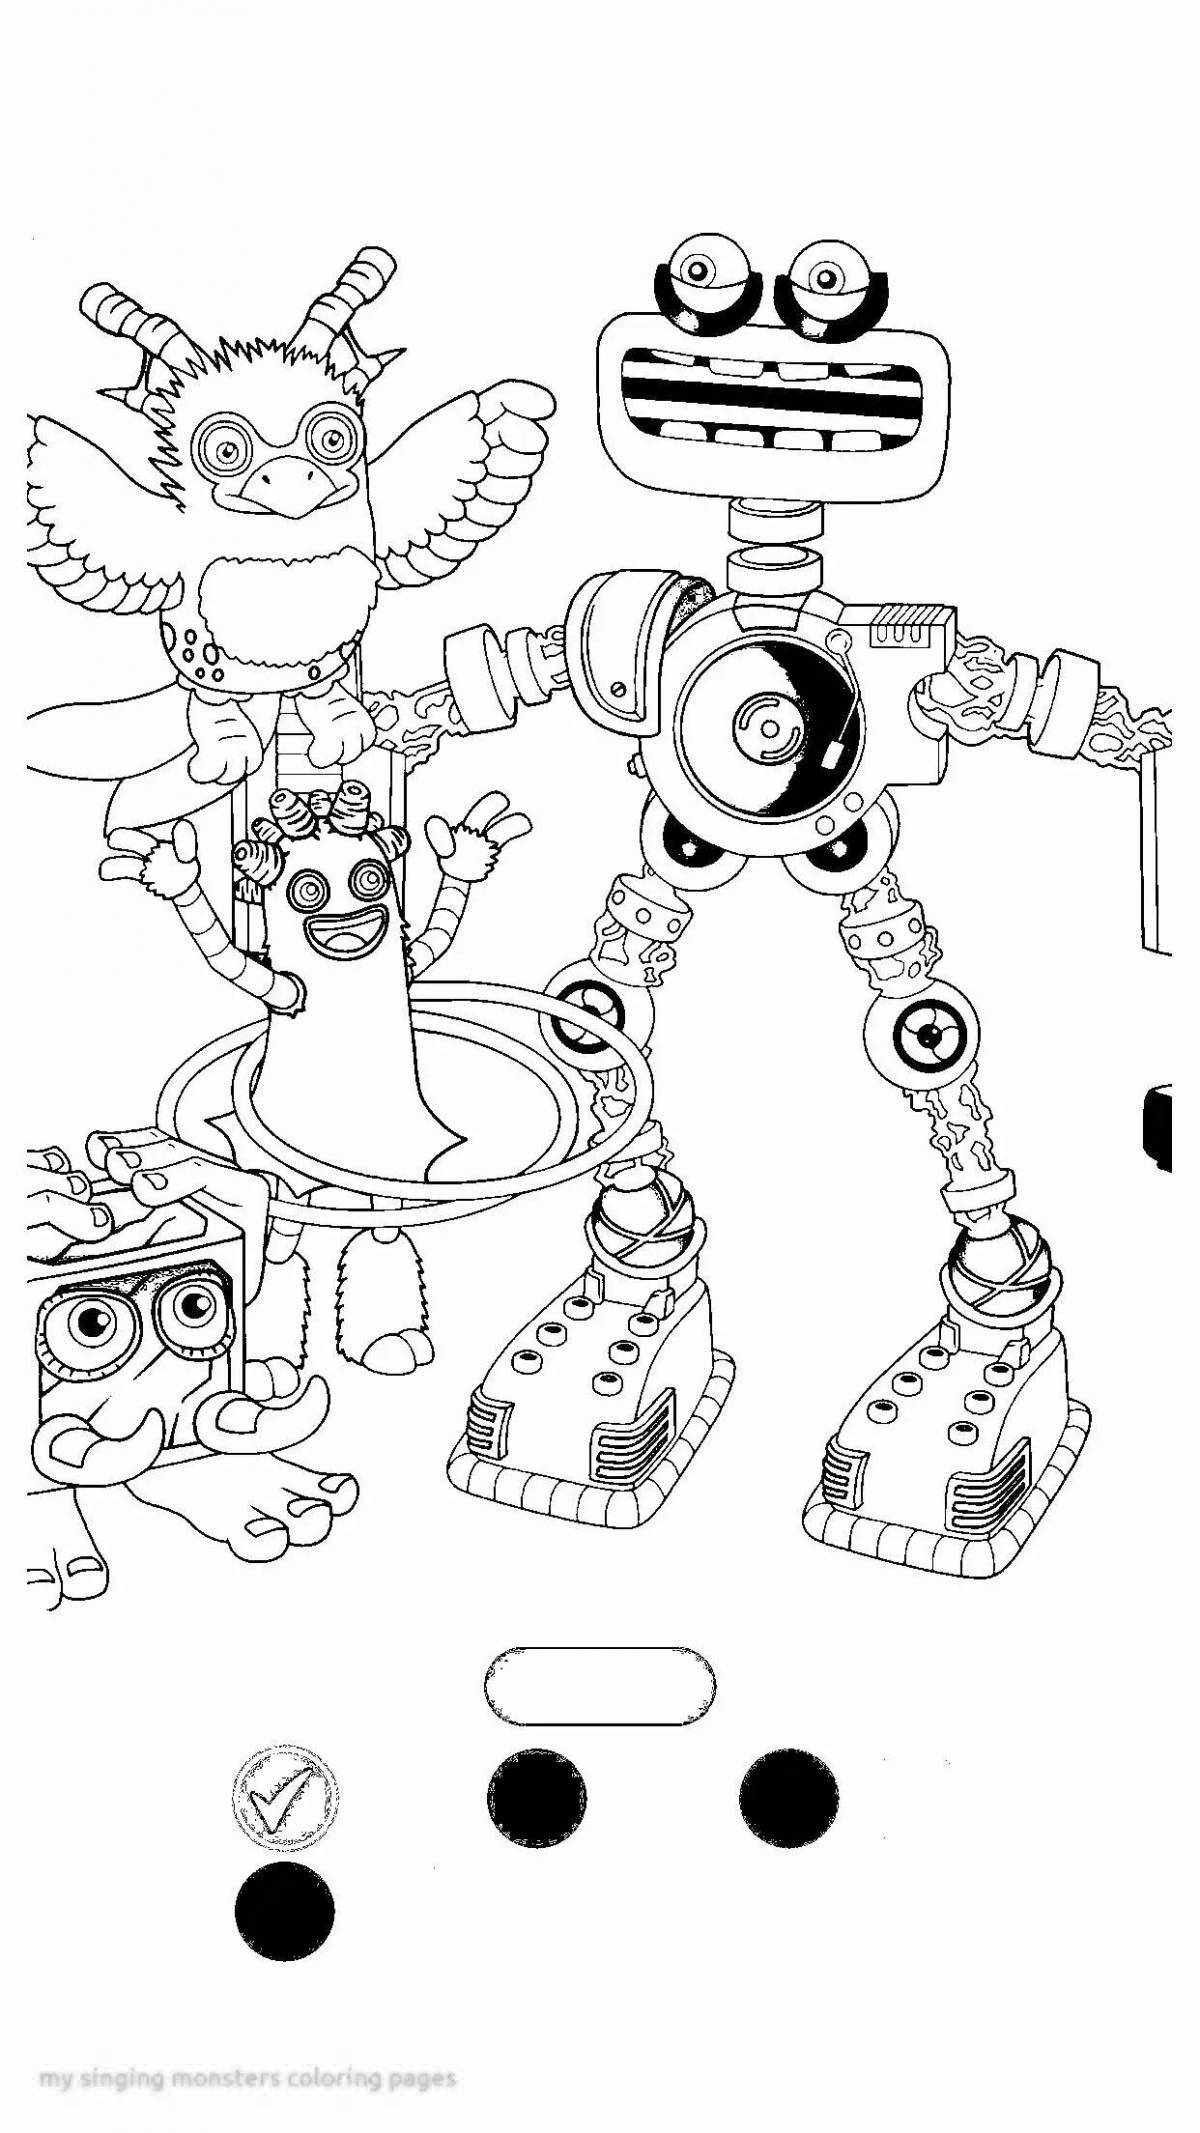 Coloring page my lovely singing monsters